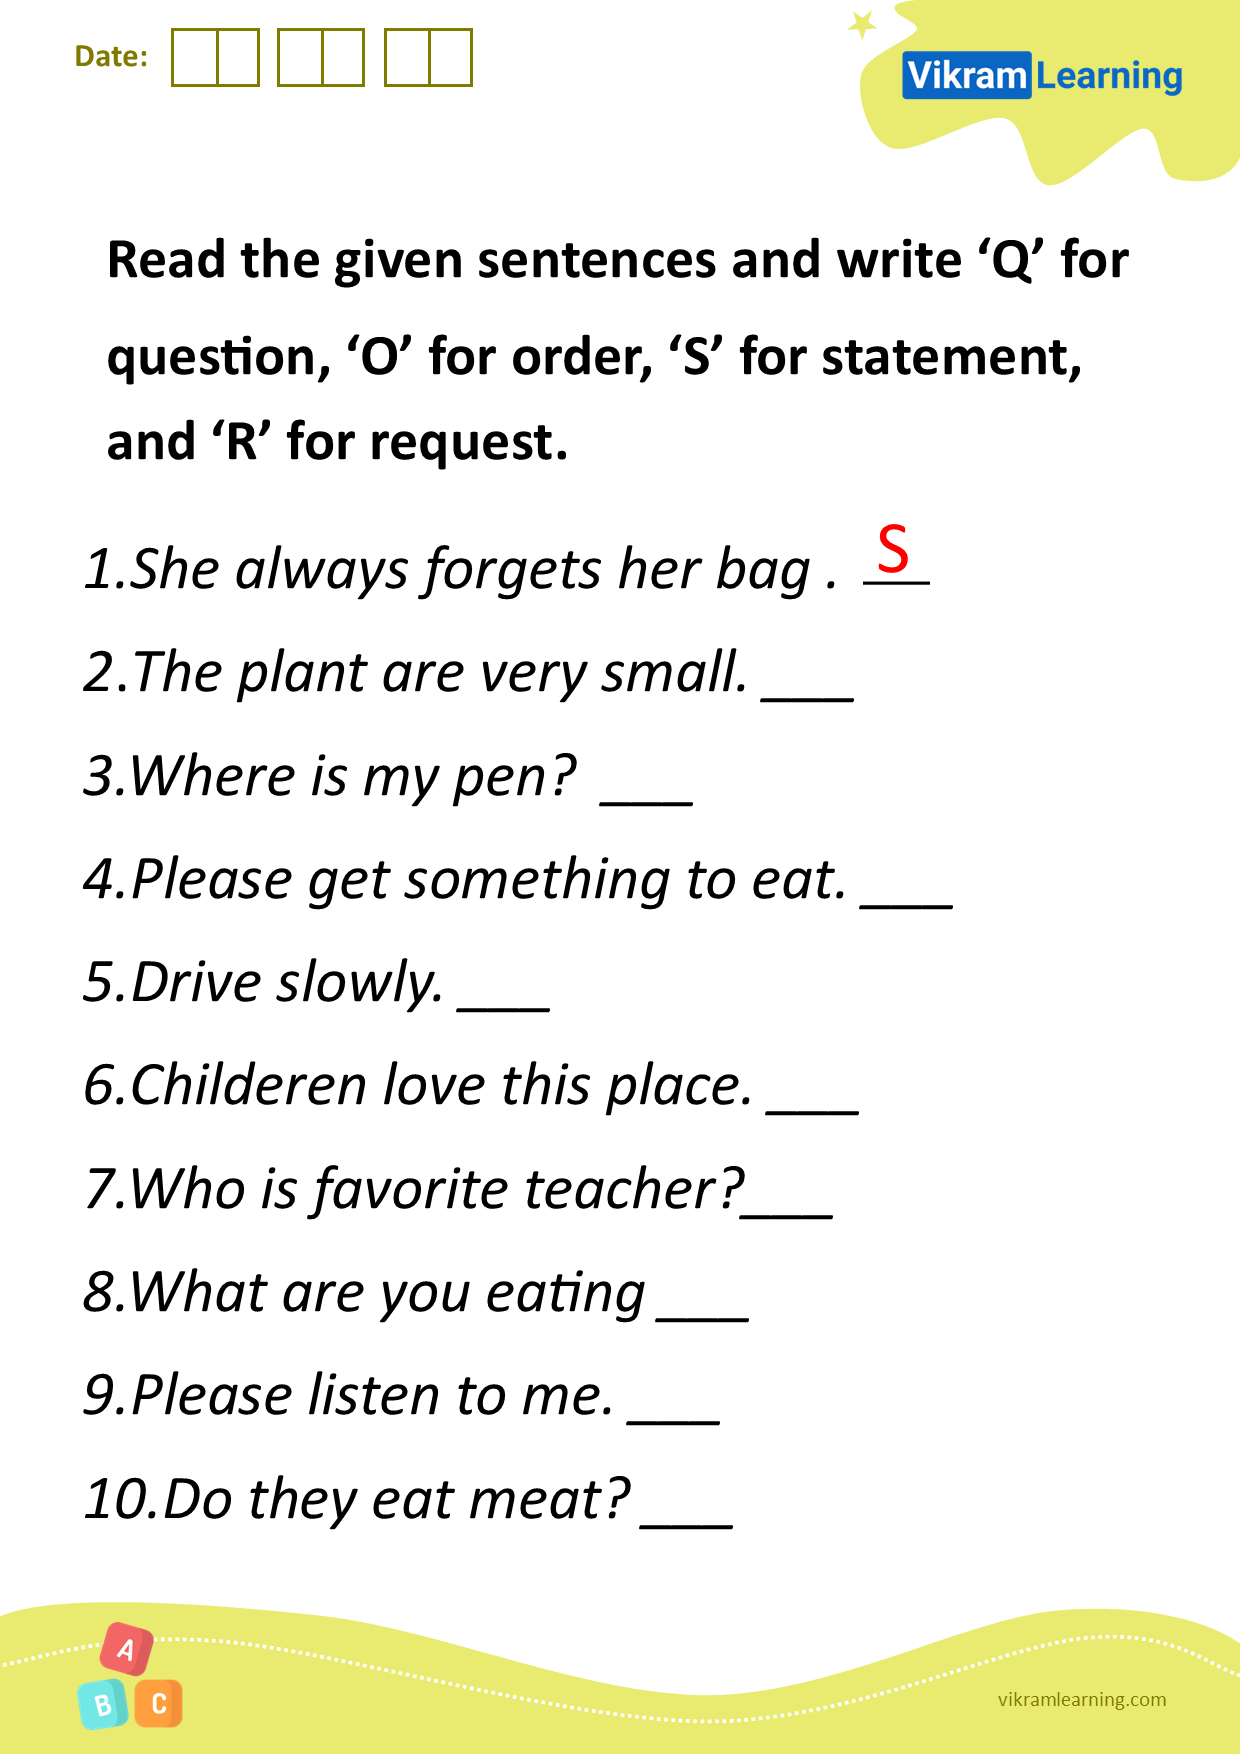 Download read the given sentences and write ‘q’ for the question, ‘o’ for order, ‘s’ for statement, and ‘r’ for the request worksheets